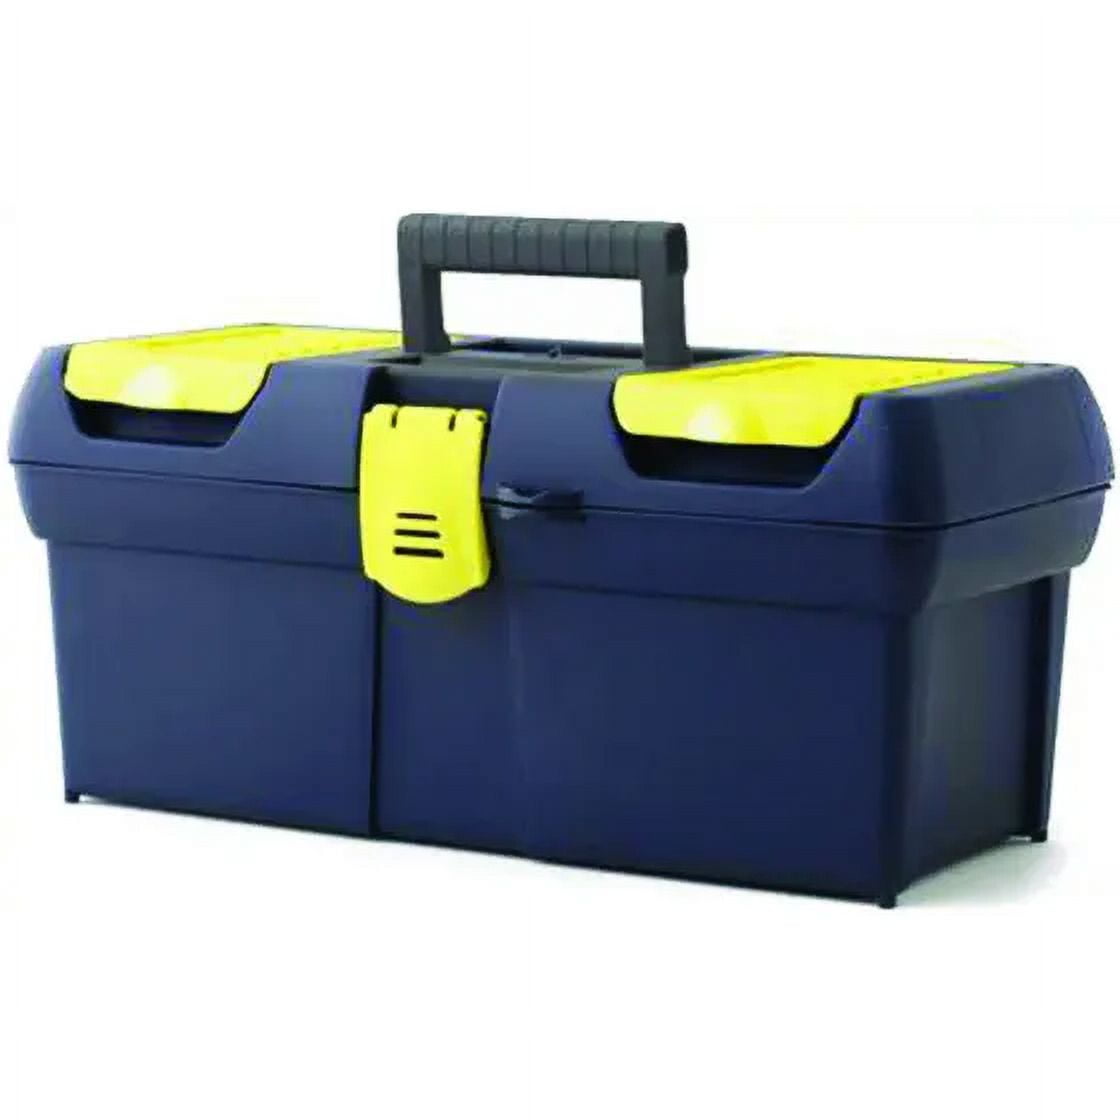 Stanley Tool 016011R Portable Tool Box With Plastic Latch, 2.1 Gallon  Plastic, Black/Yellow, 1-Drawer, 4-Compartment